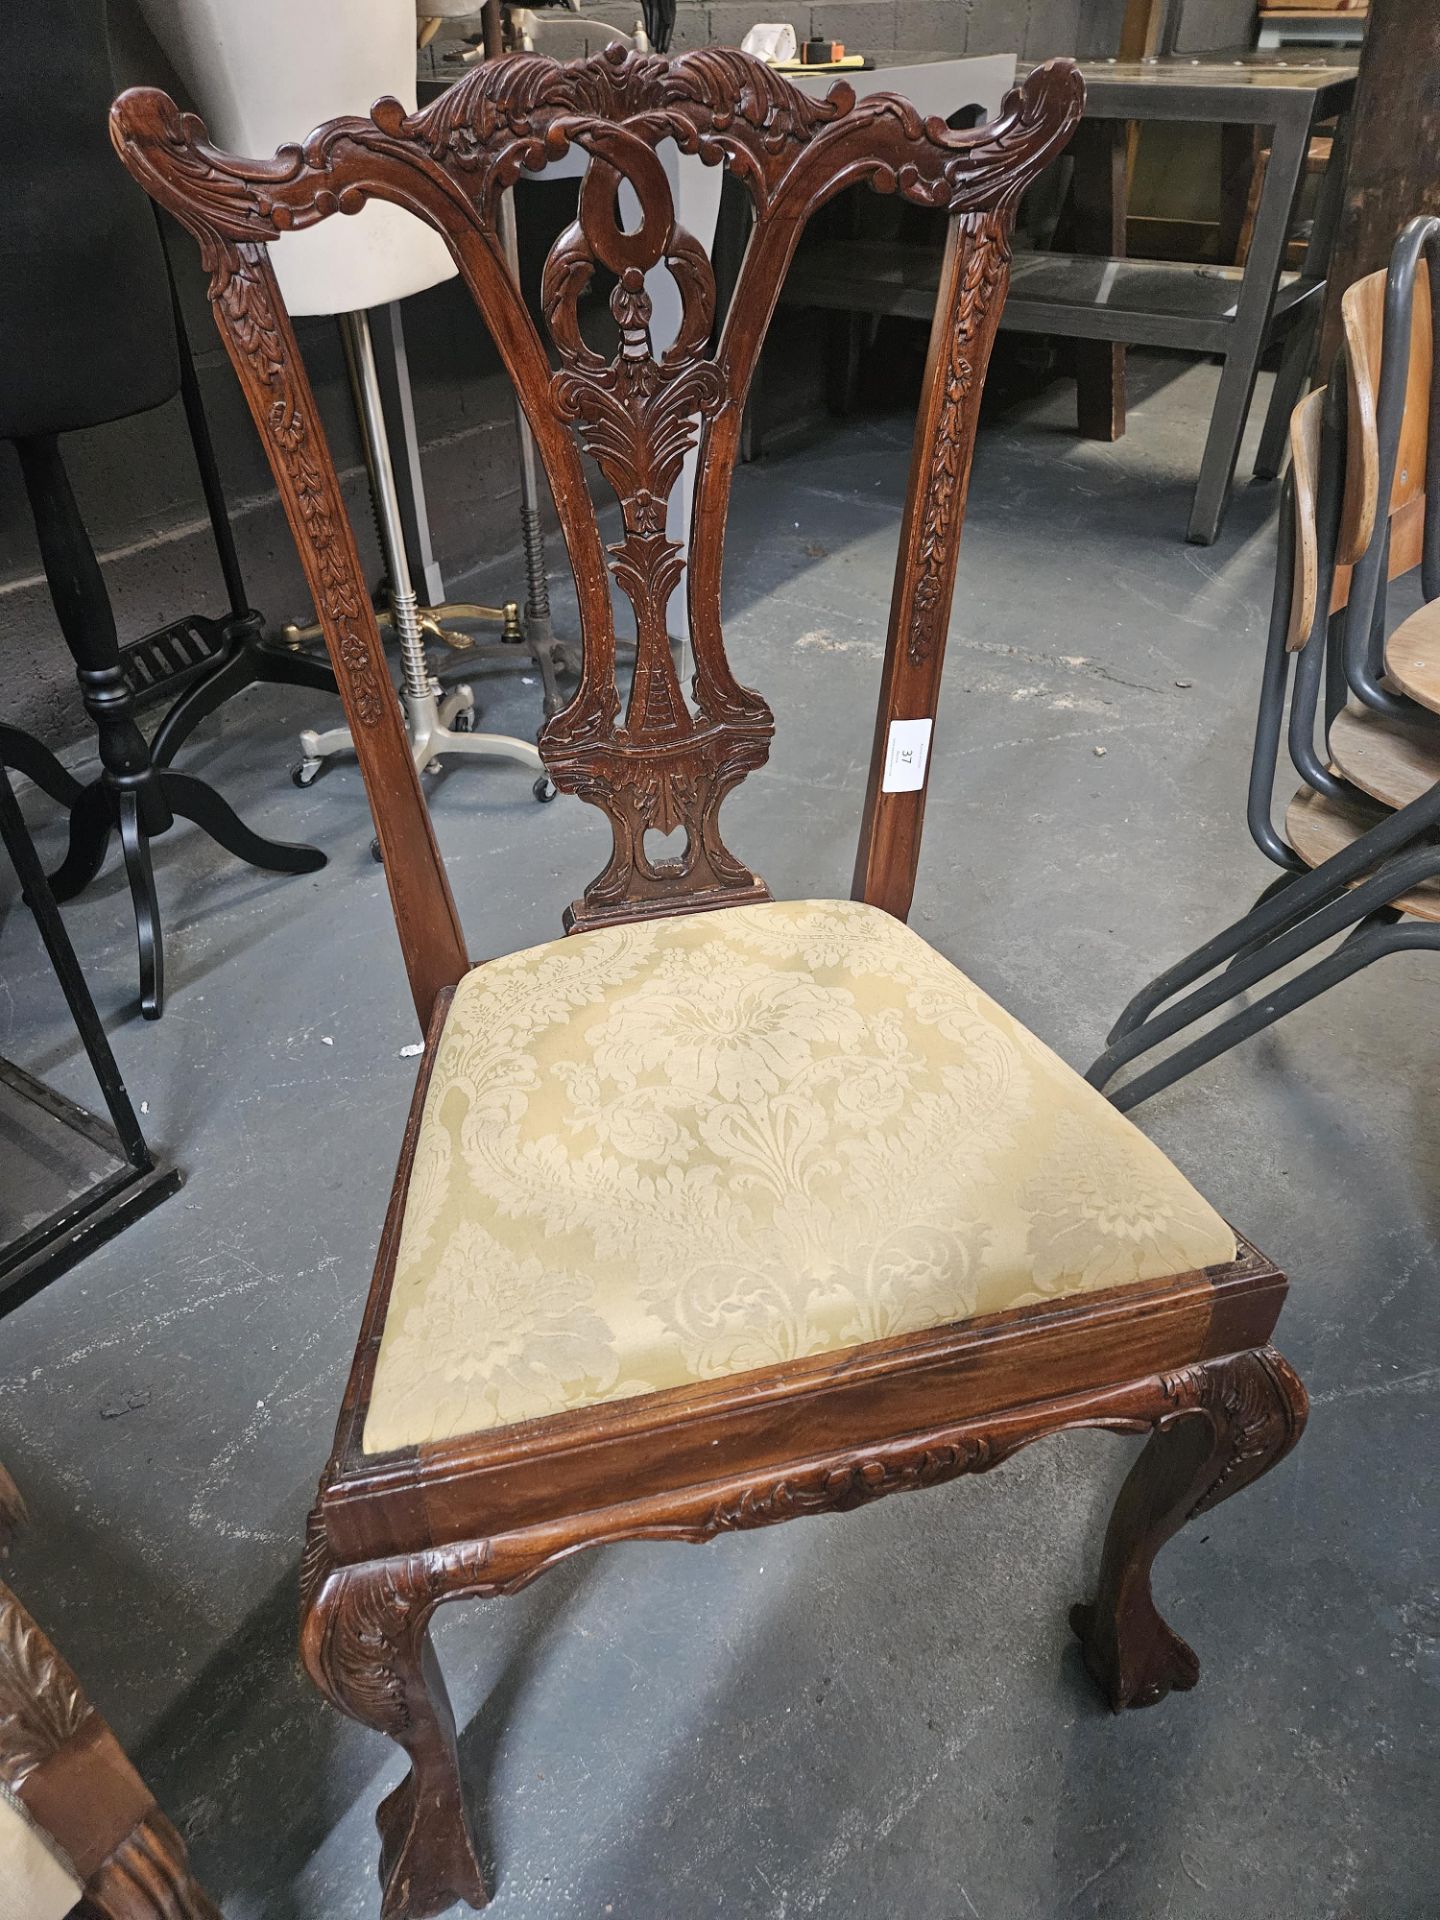 Carved Wooden Chair - Image 2 of 3